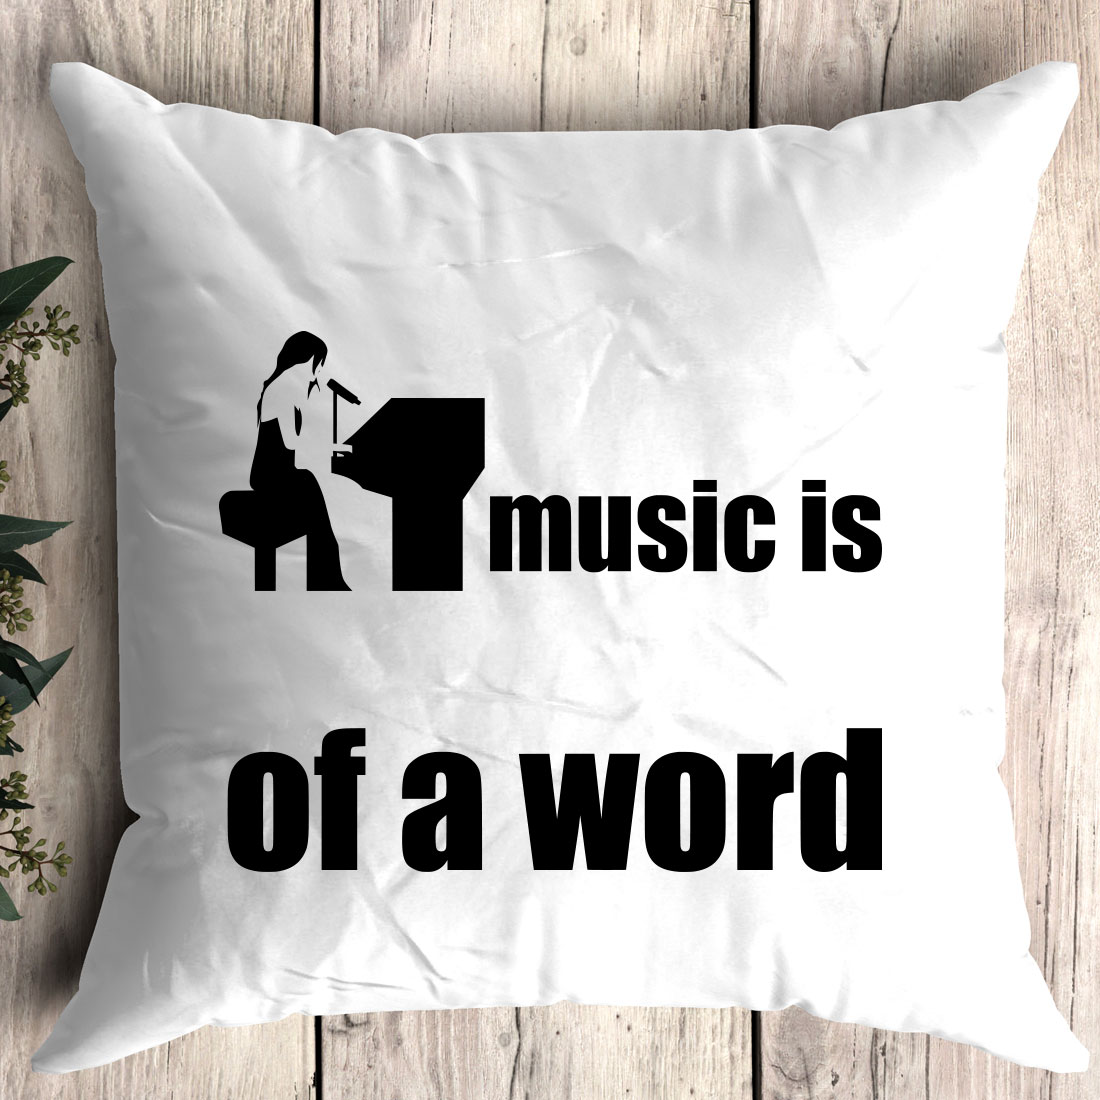 Pillow that says music is of a word.